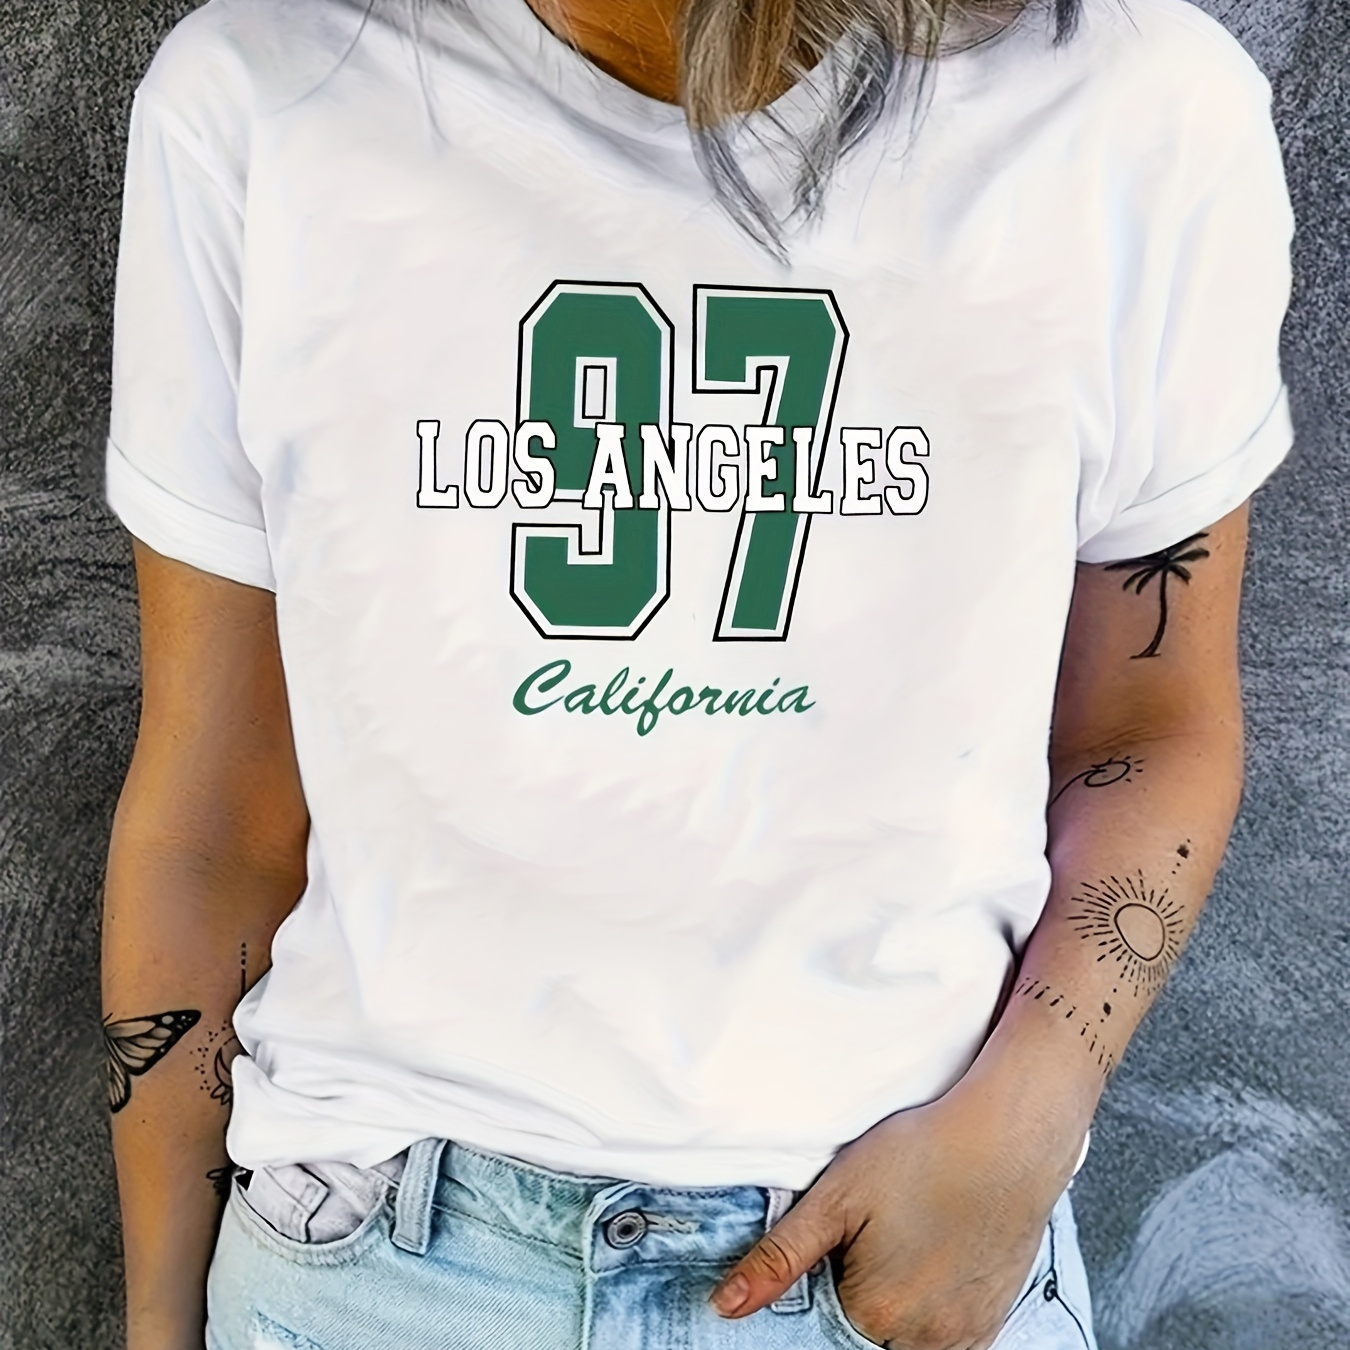 

Los Angeles Print T-shirt, Short Sleeve Crew Neck Casual Top For Summer & Spring, Women's Clothing